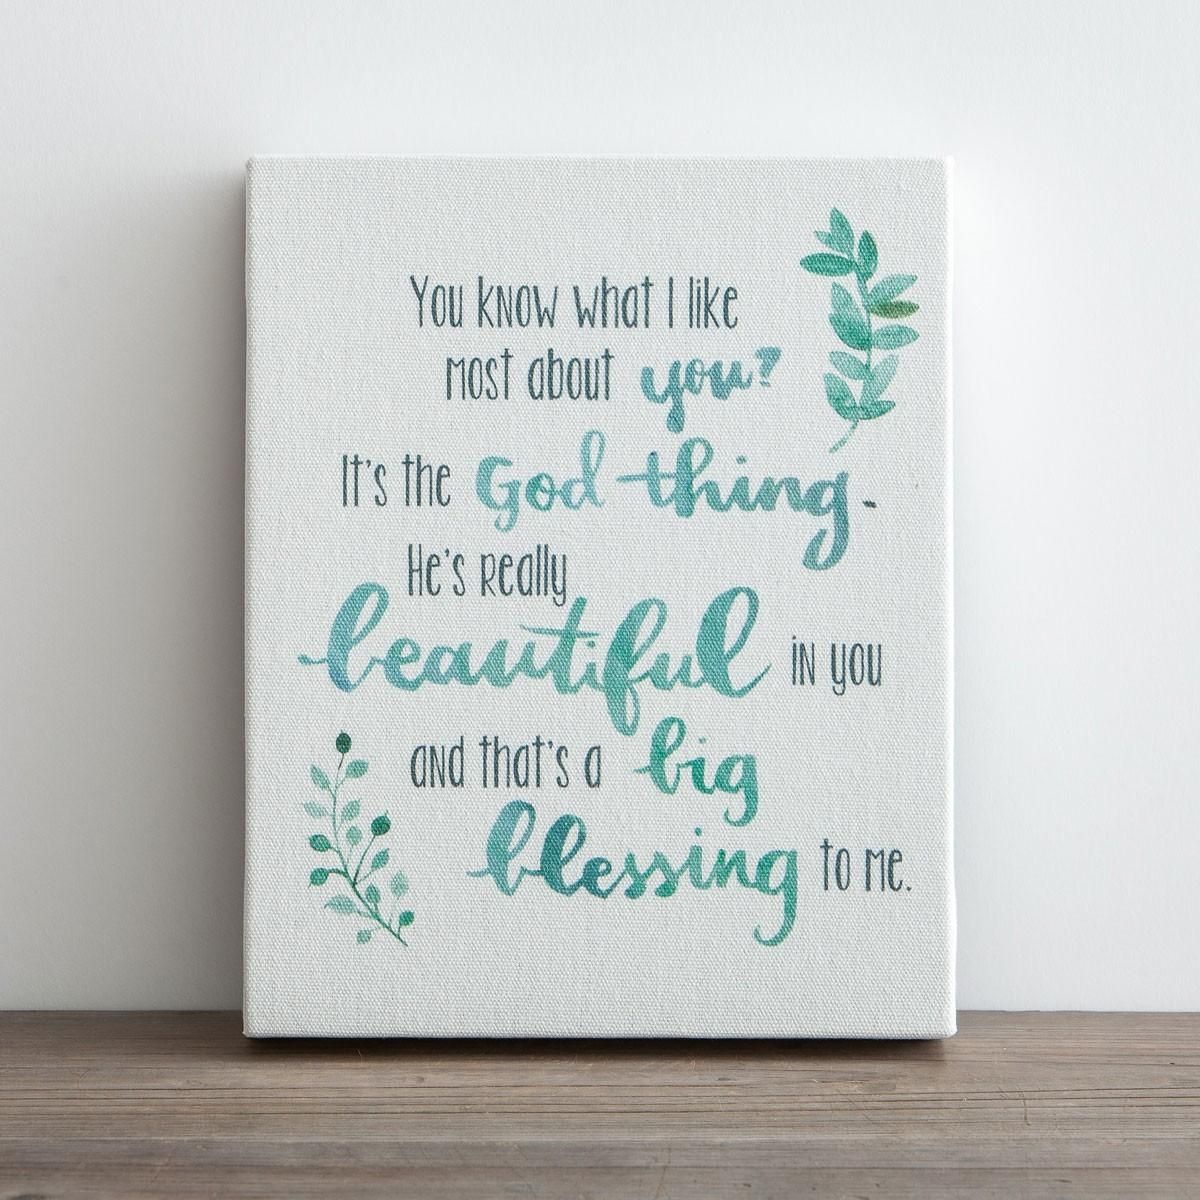 It's The God Thing – Printed Canvas Block | Dayspring Intended For Christian Canvas Wall Art (View 2 of 20)